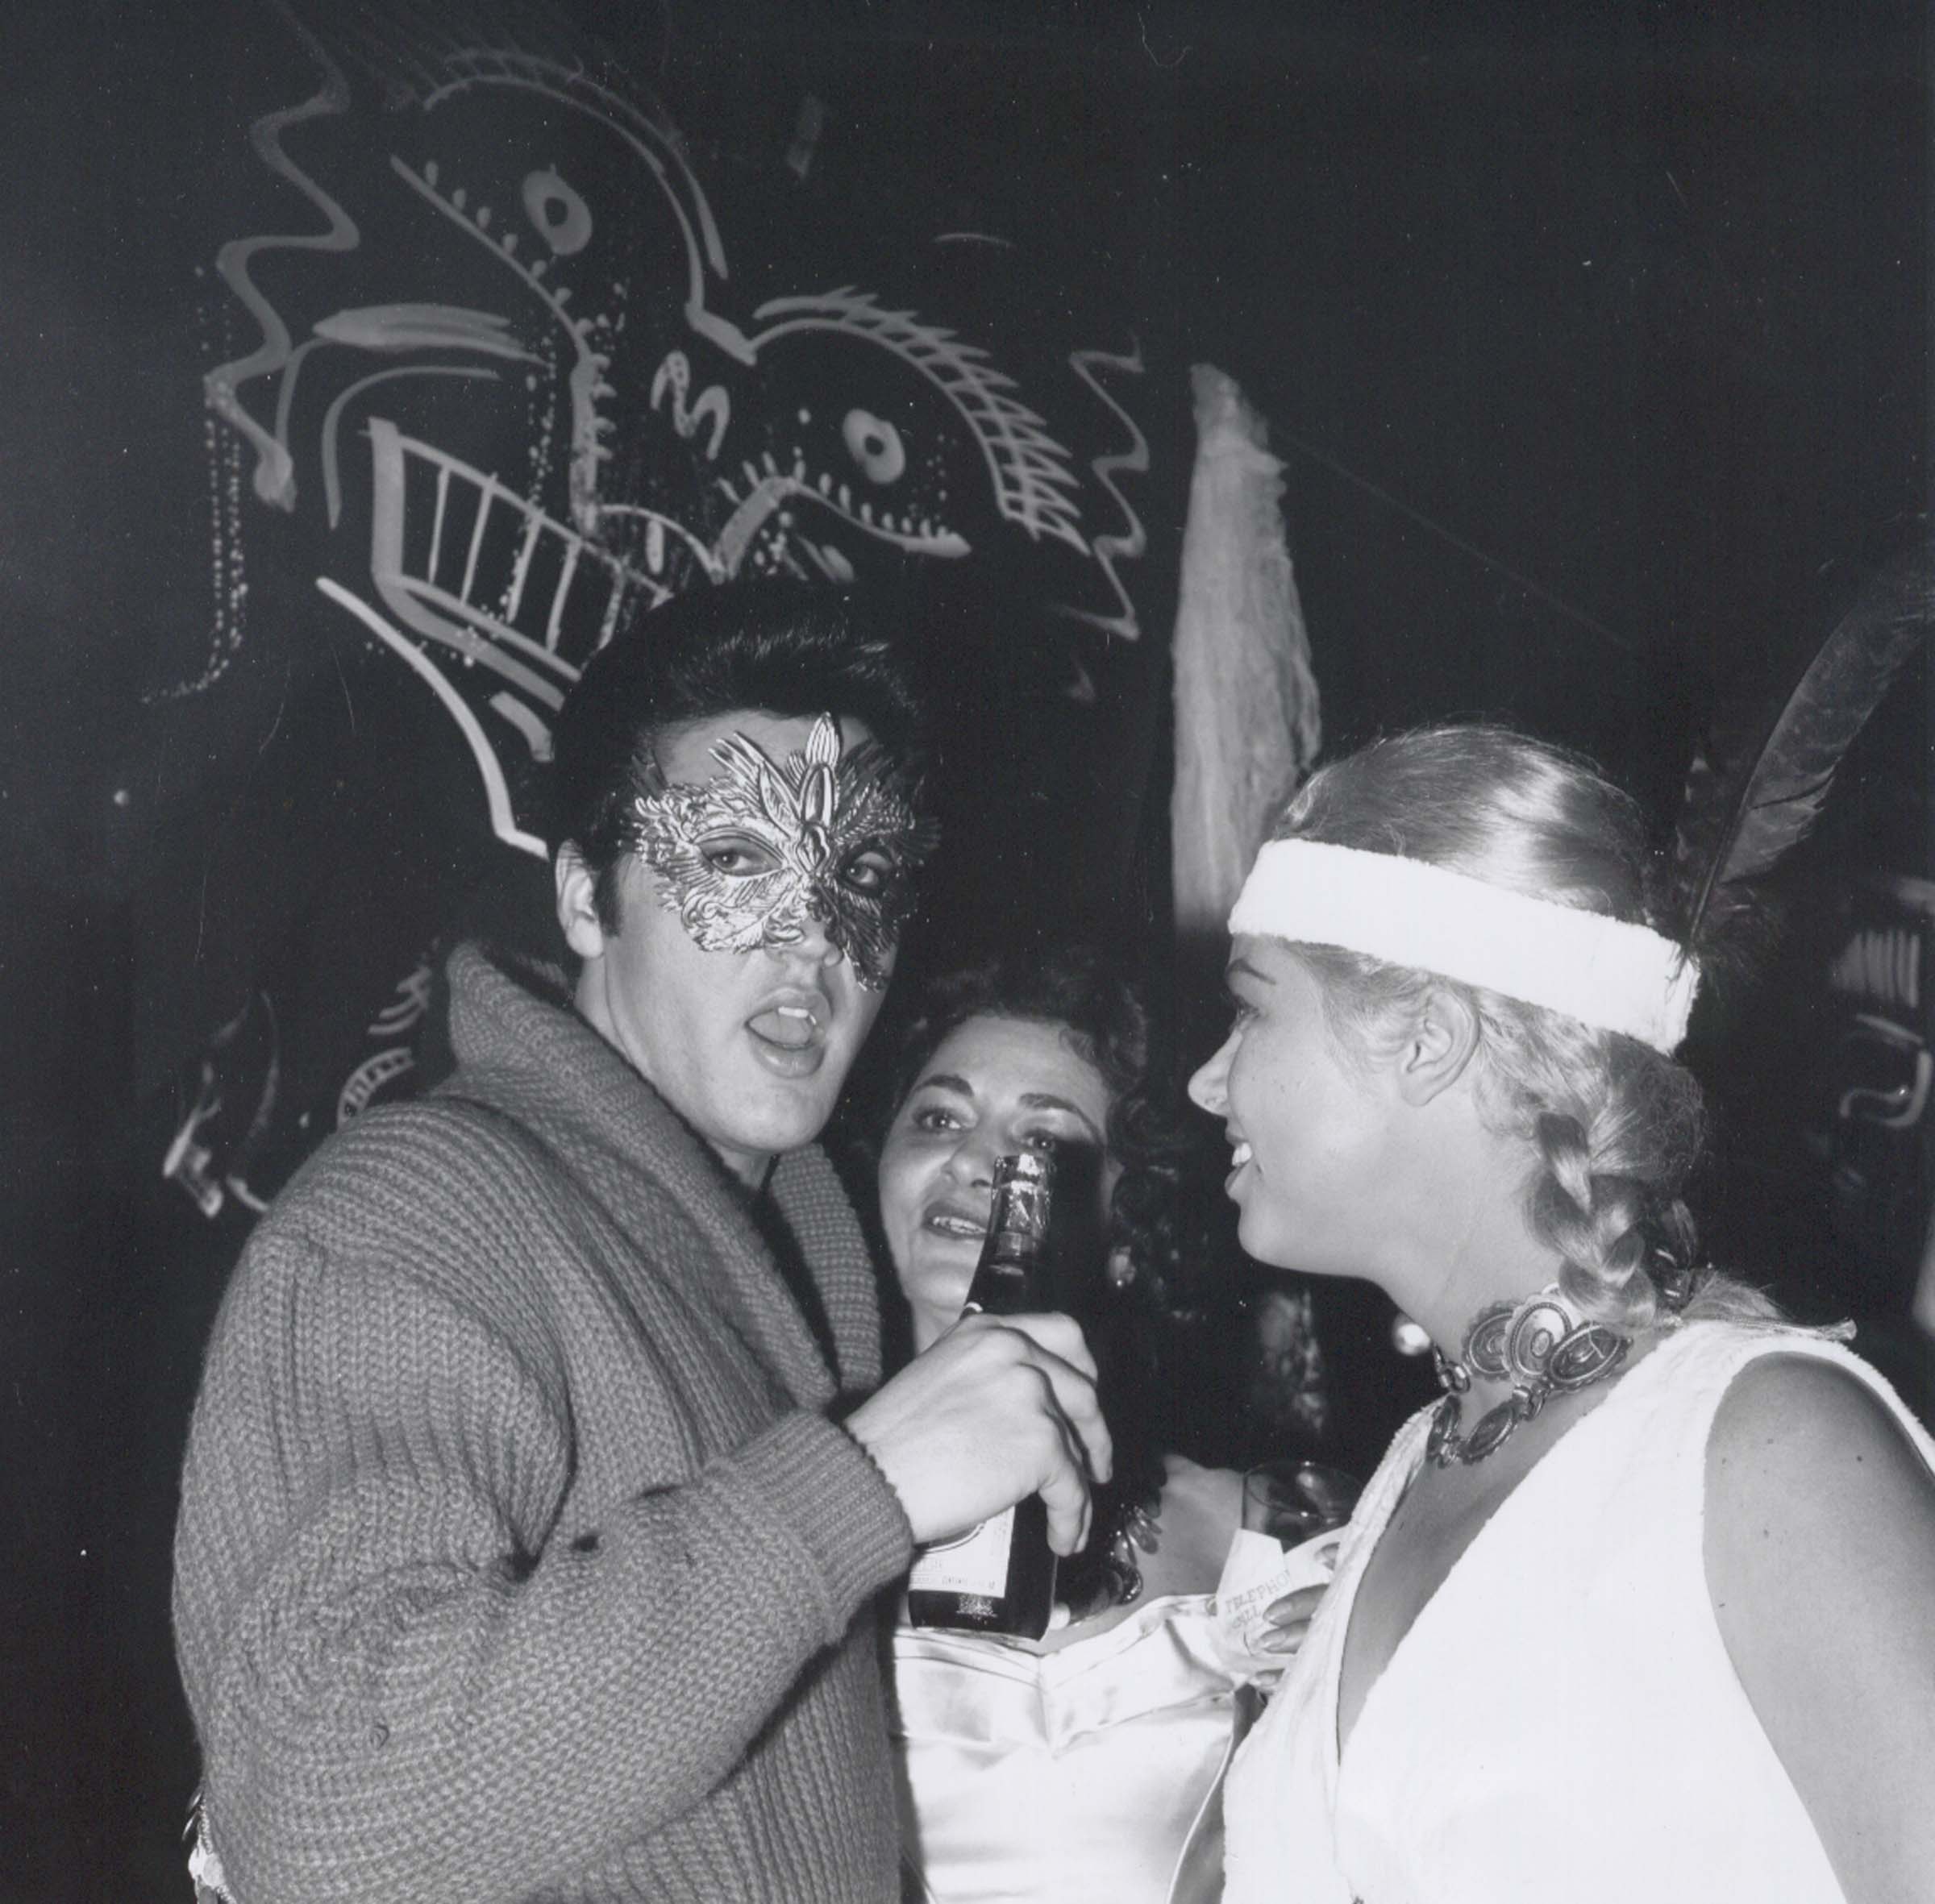 JEANNE CARMEN & ELVIS PRESLEY at SY DEVORE'S Halloween party: October 31st, 1957: Beverly Hills, California [*Note: This is the only known photo of Elvis with beer in hand] [**Note: Elvis drinks CARTA BLANCA, Cerveza fit for a King]